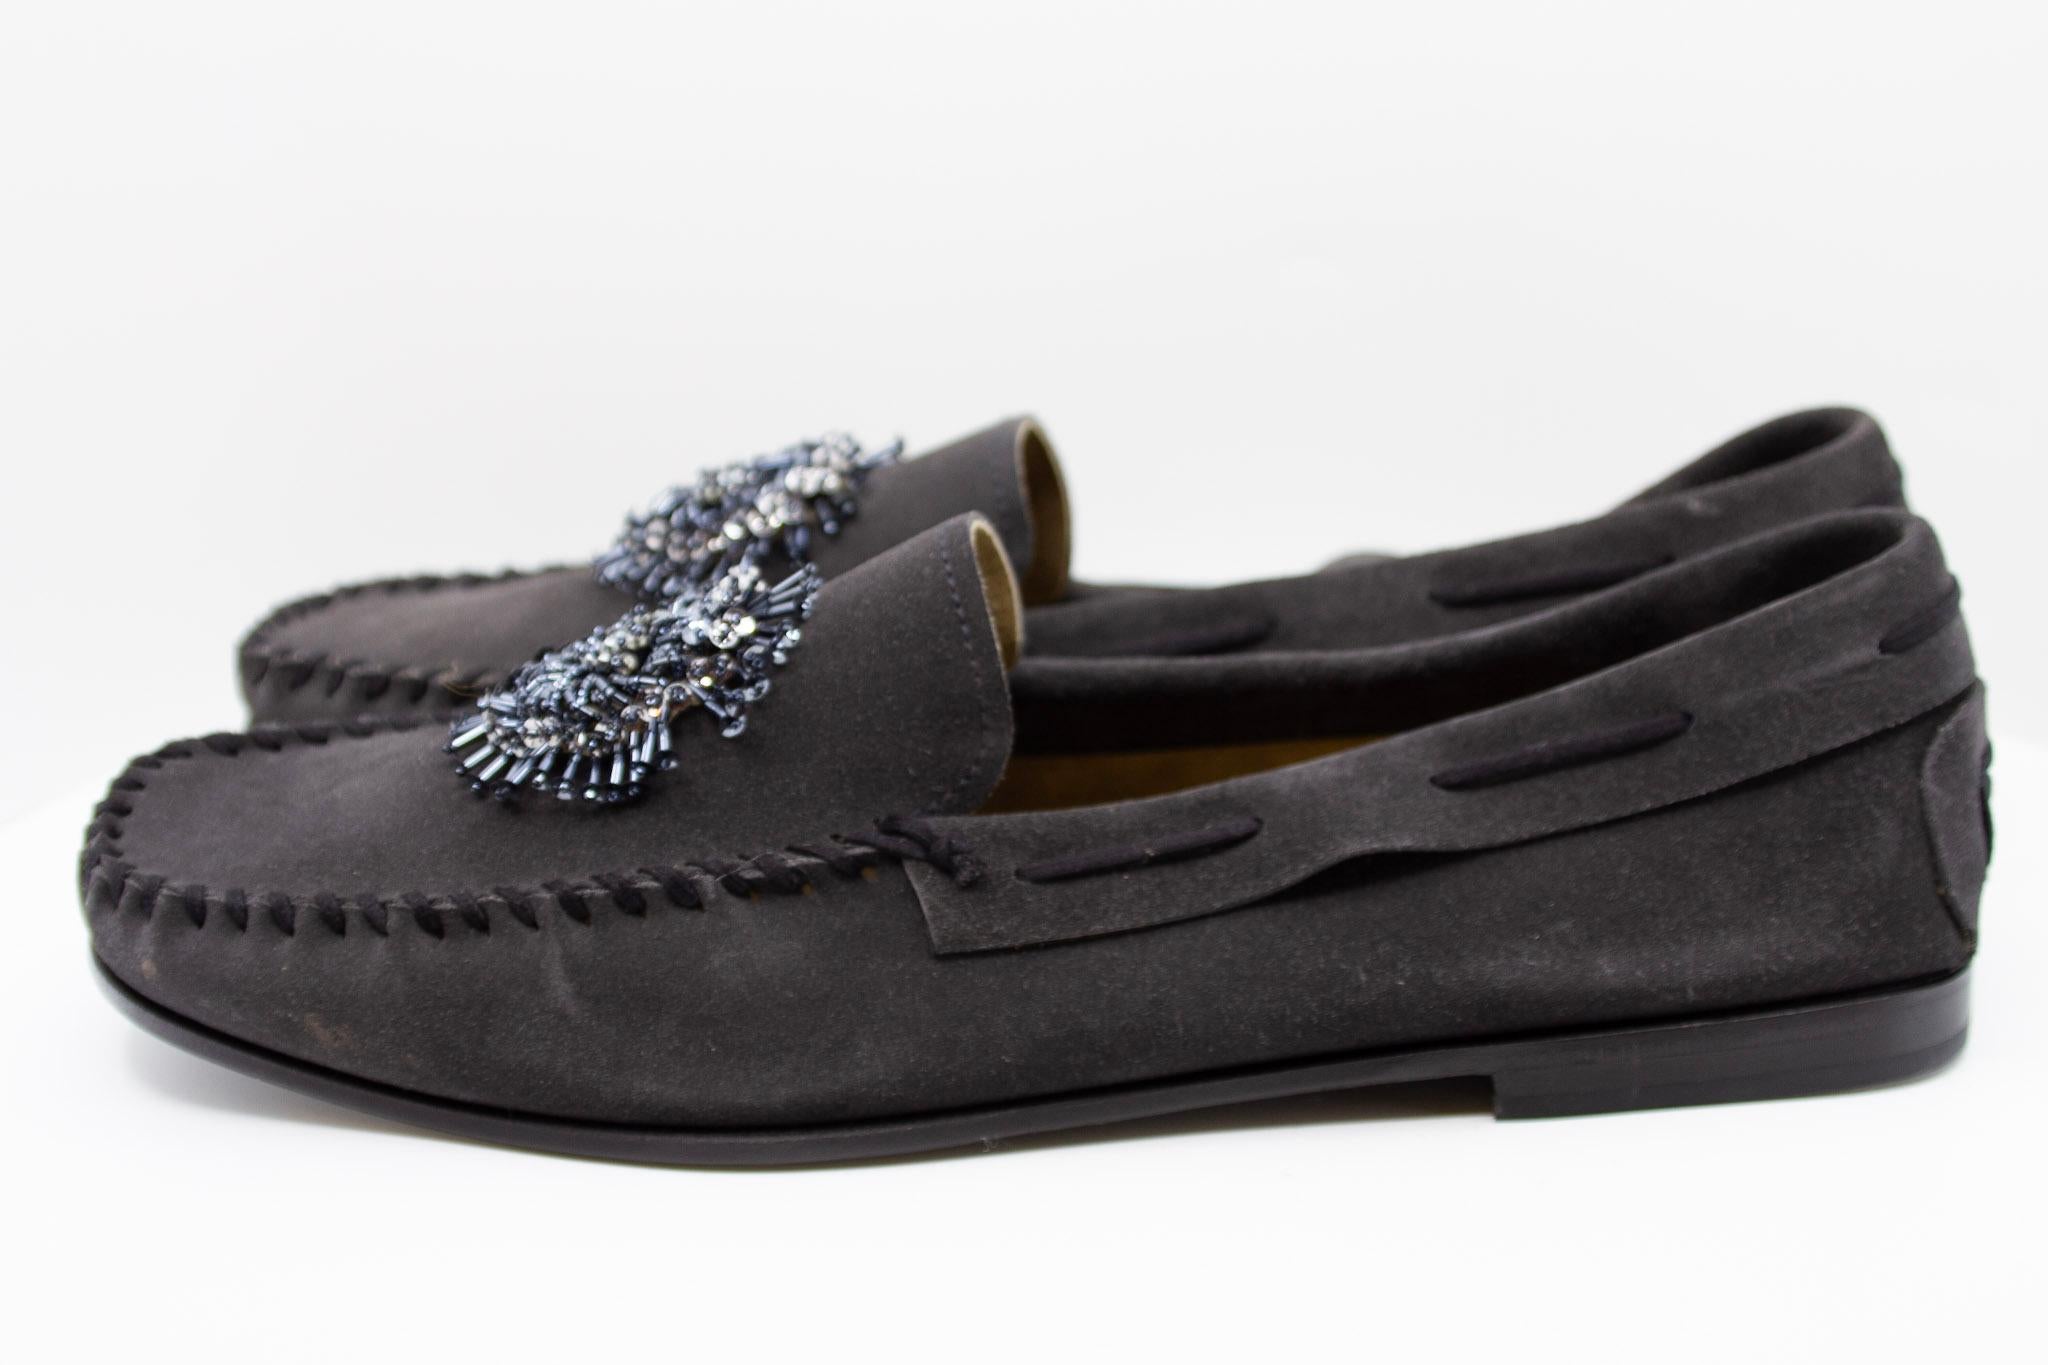 Prada Charcoal Suede Loafers with Beaded Embellishments and Leather Soles In Excellent Condition For Sale In Kingston, NY